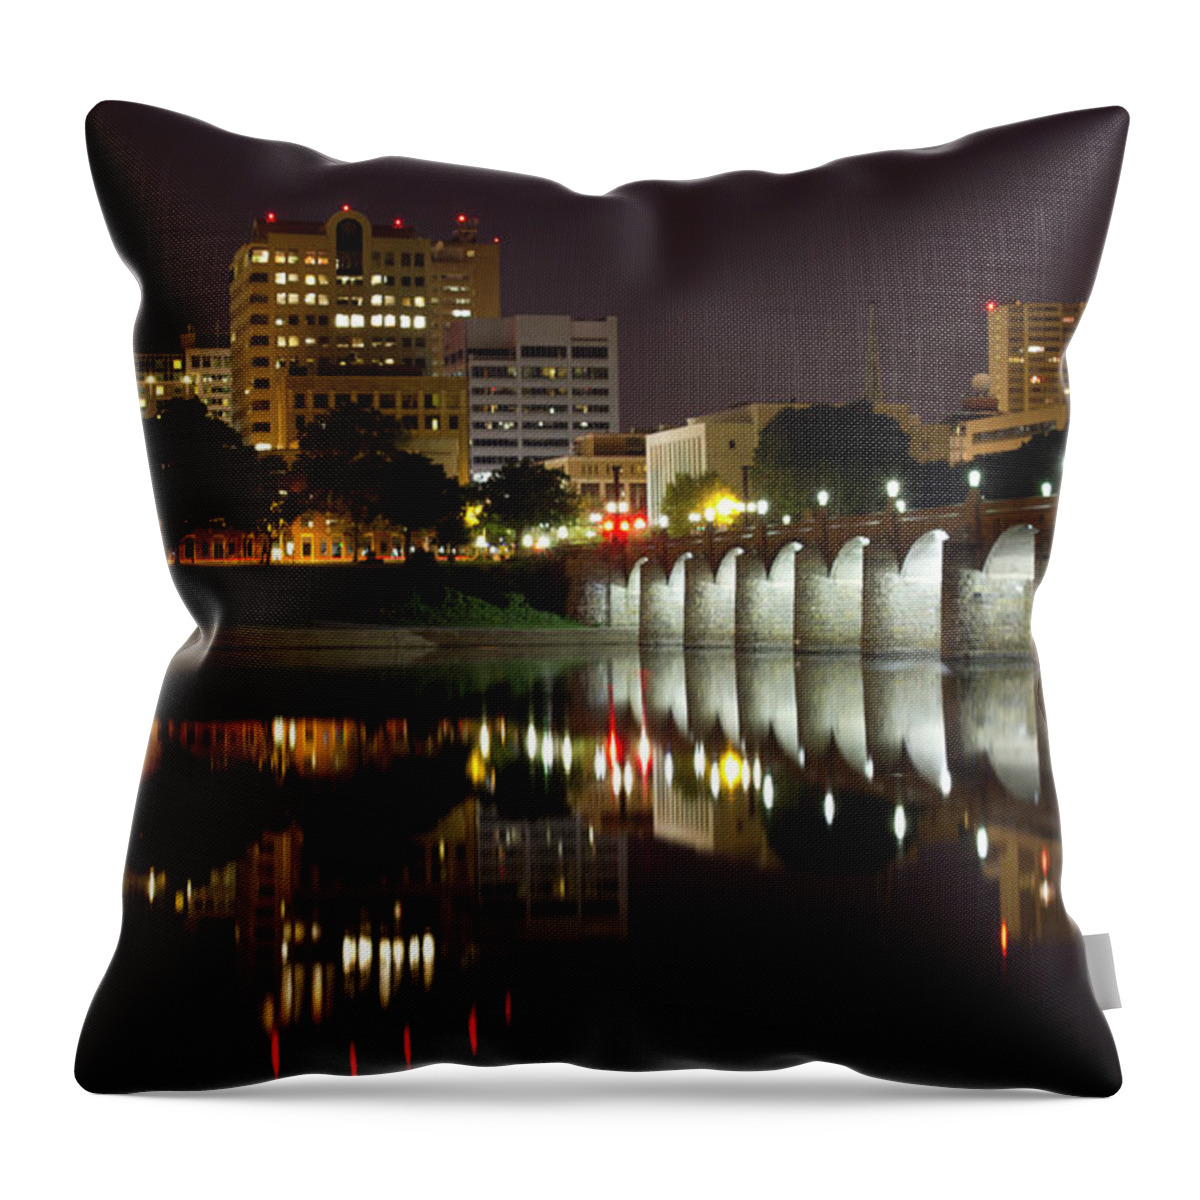 City Throw Pillow featuring the photograph Market Street Bridge Reflections by Shelley Neff